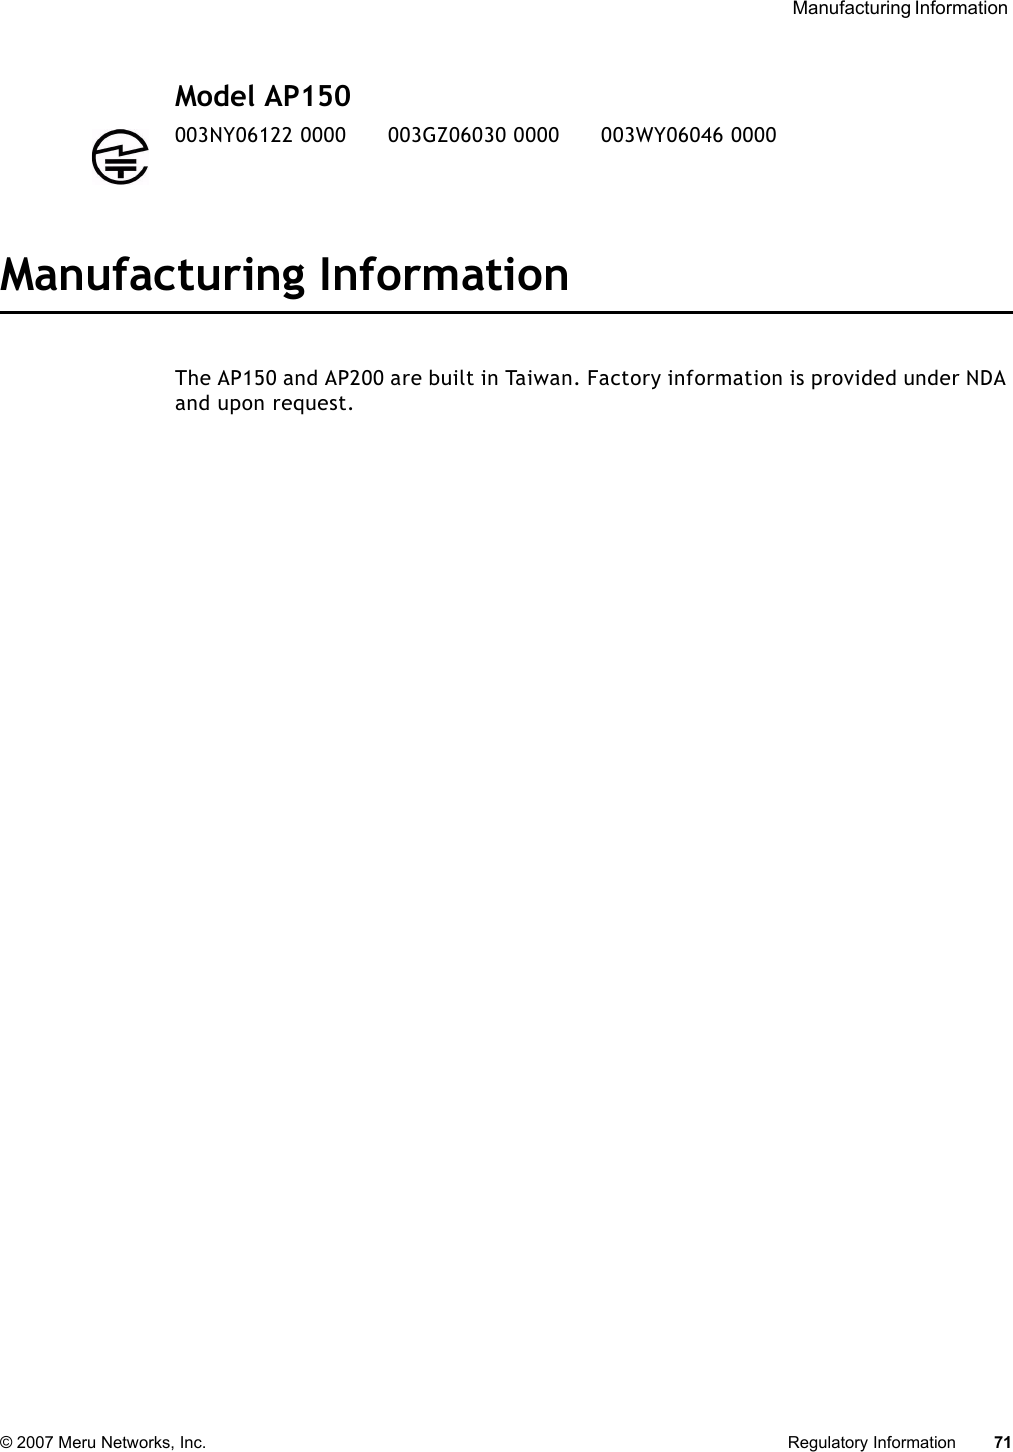  Manufacturing Information © 2007 Meru Networks, Inc. Regulatory Information 71 Model AP150 Manufacturing InformationThe AP150 and AP200 are built in Taiwan. Factory information is provided under NDA and upon request.003NY06122 0000      003GZ06030 0000      003WY06046 0000